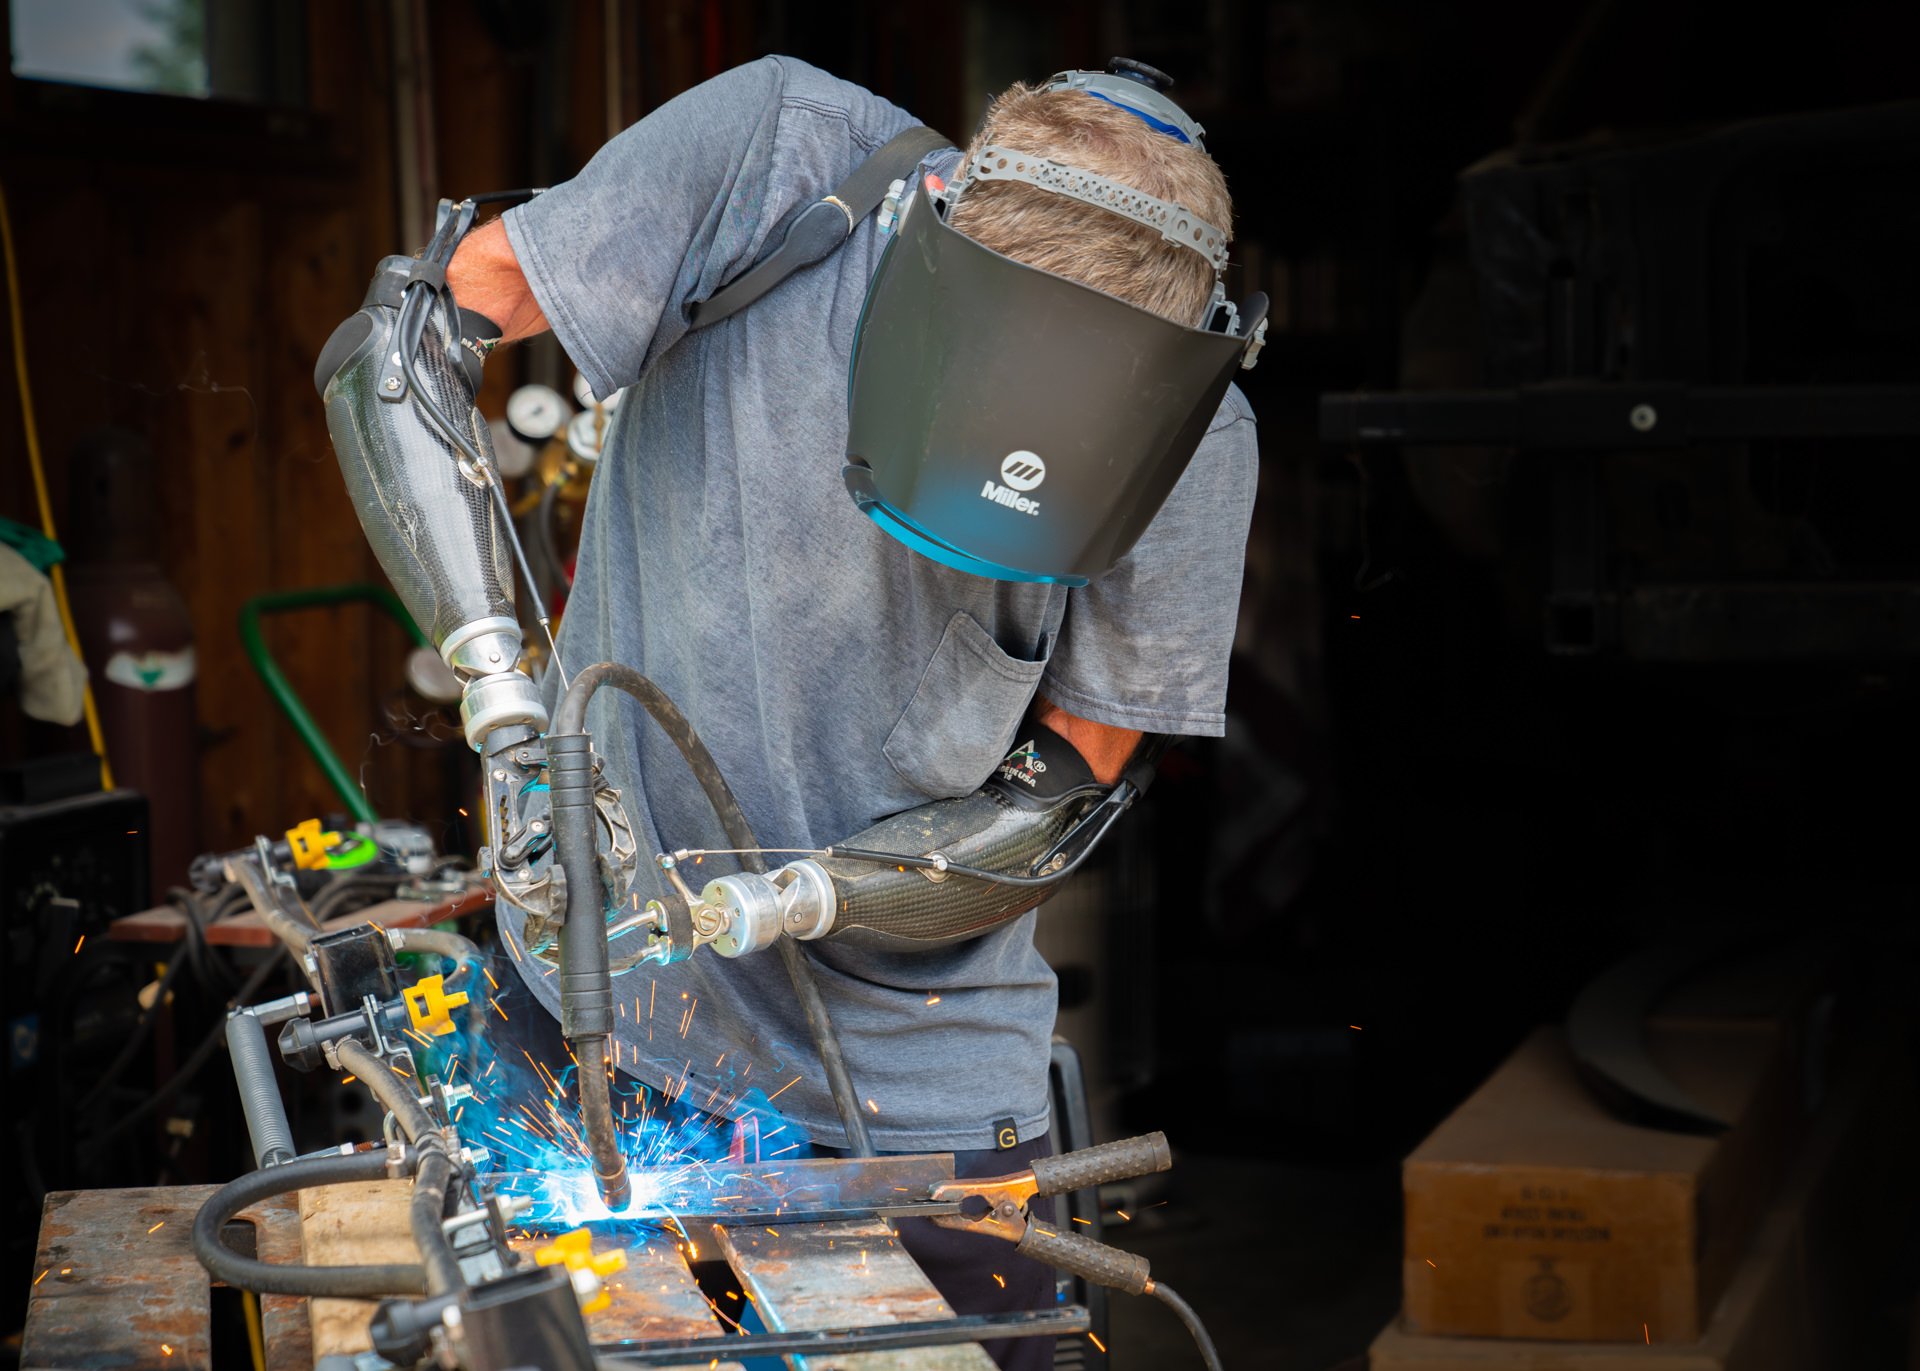 A bilateral transradial patient uses his body-powered prostheses to weld in his shop.